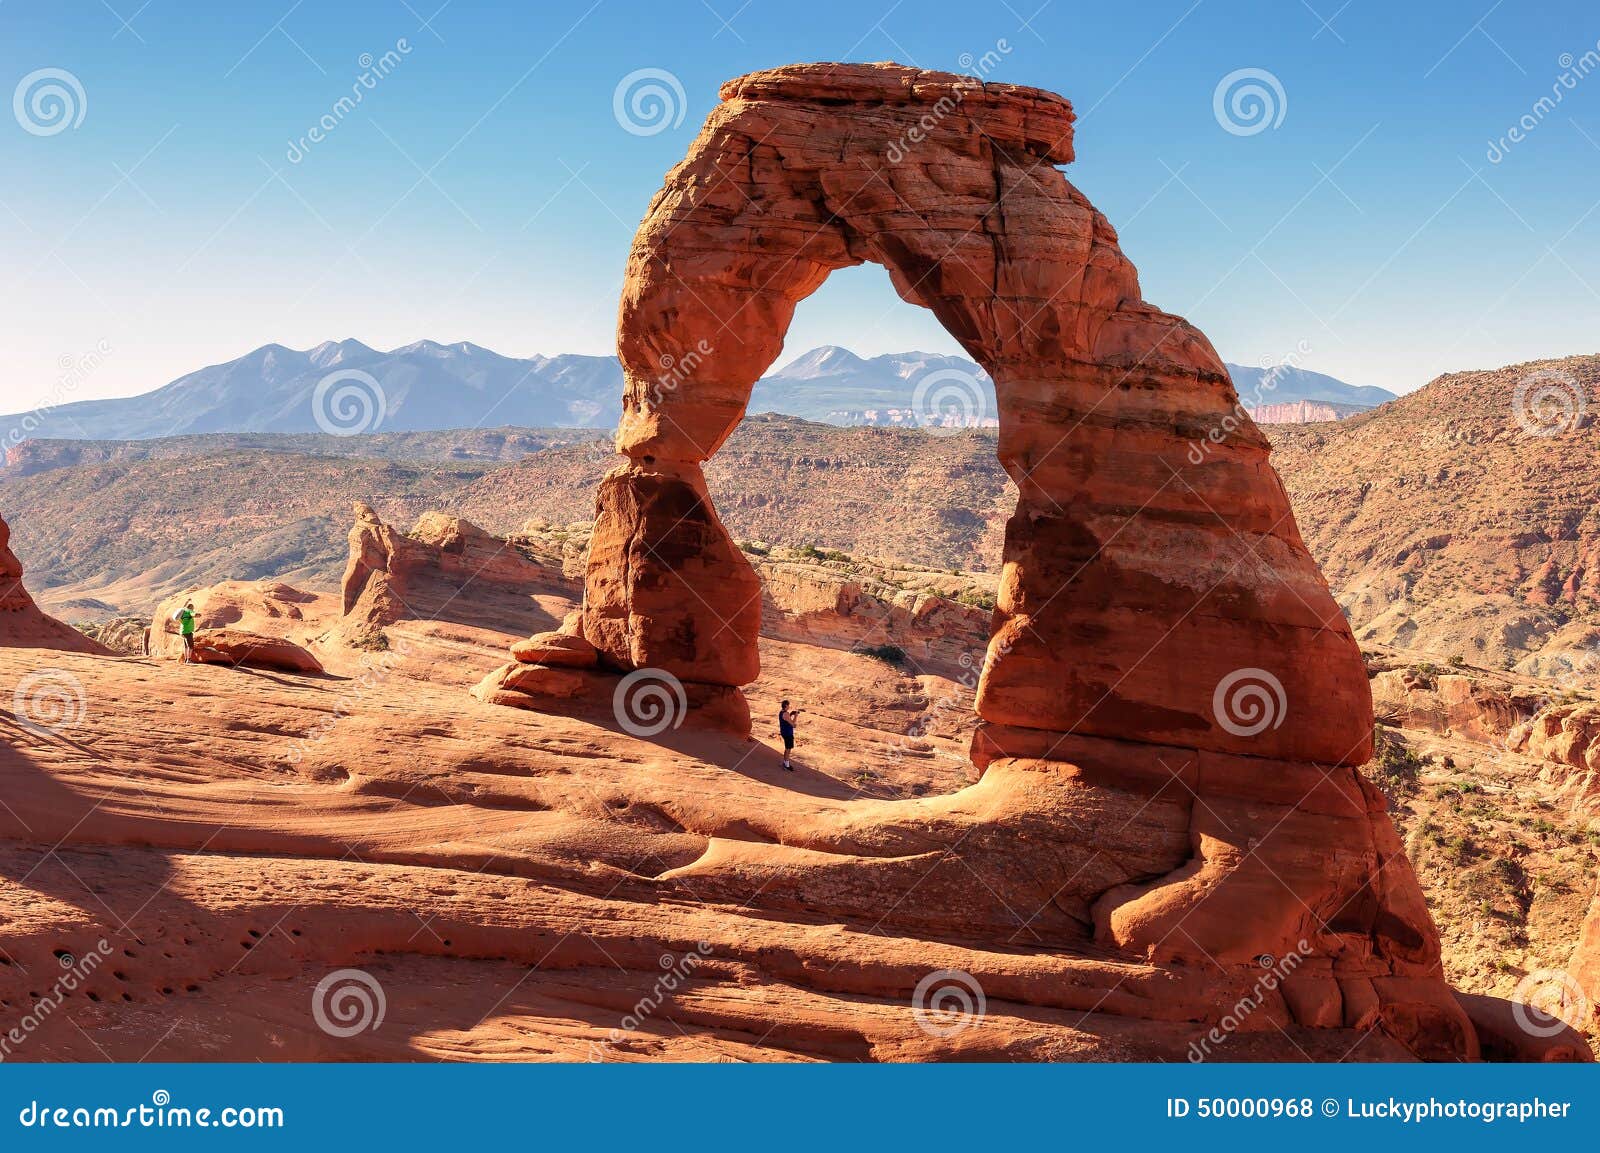 photographer at delicate arch, arches national park, utah